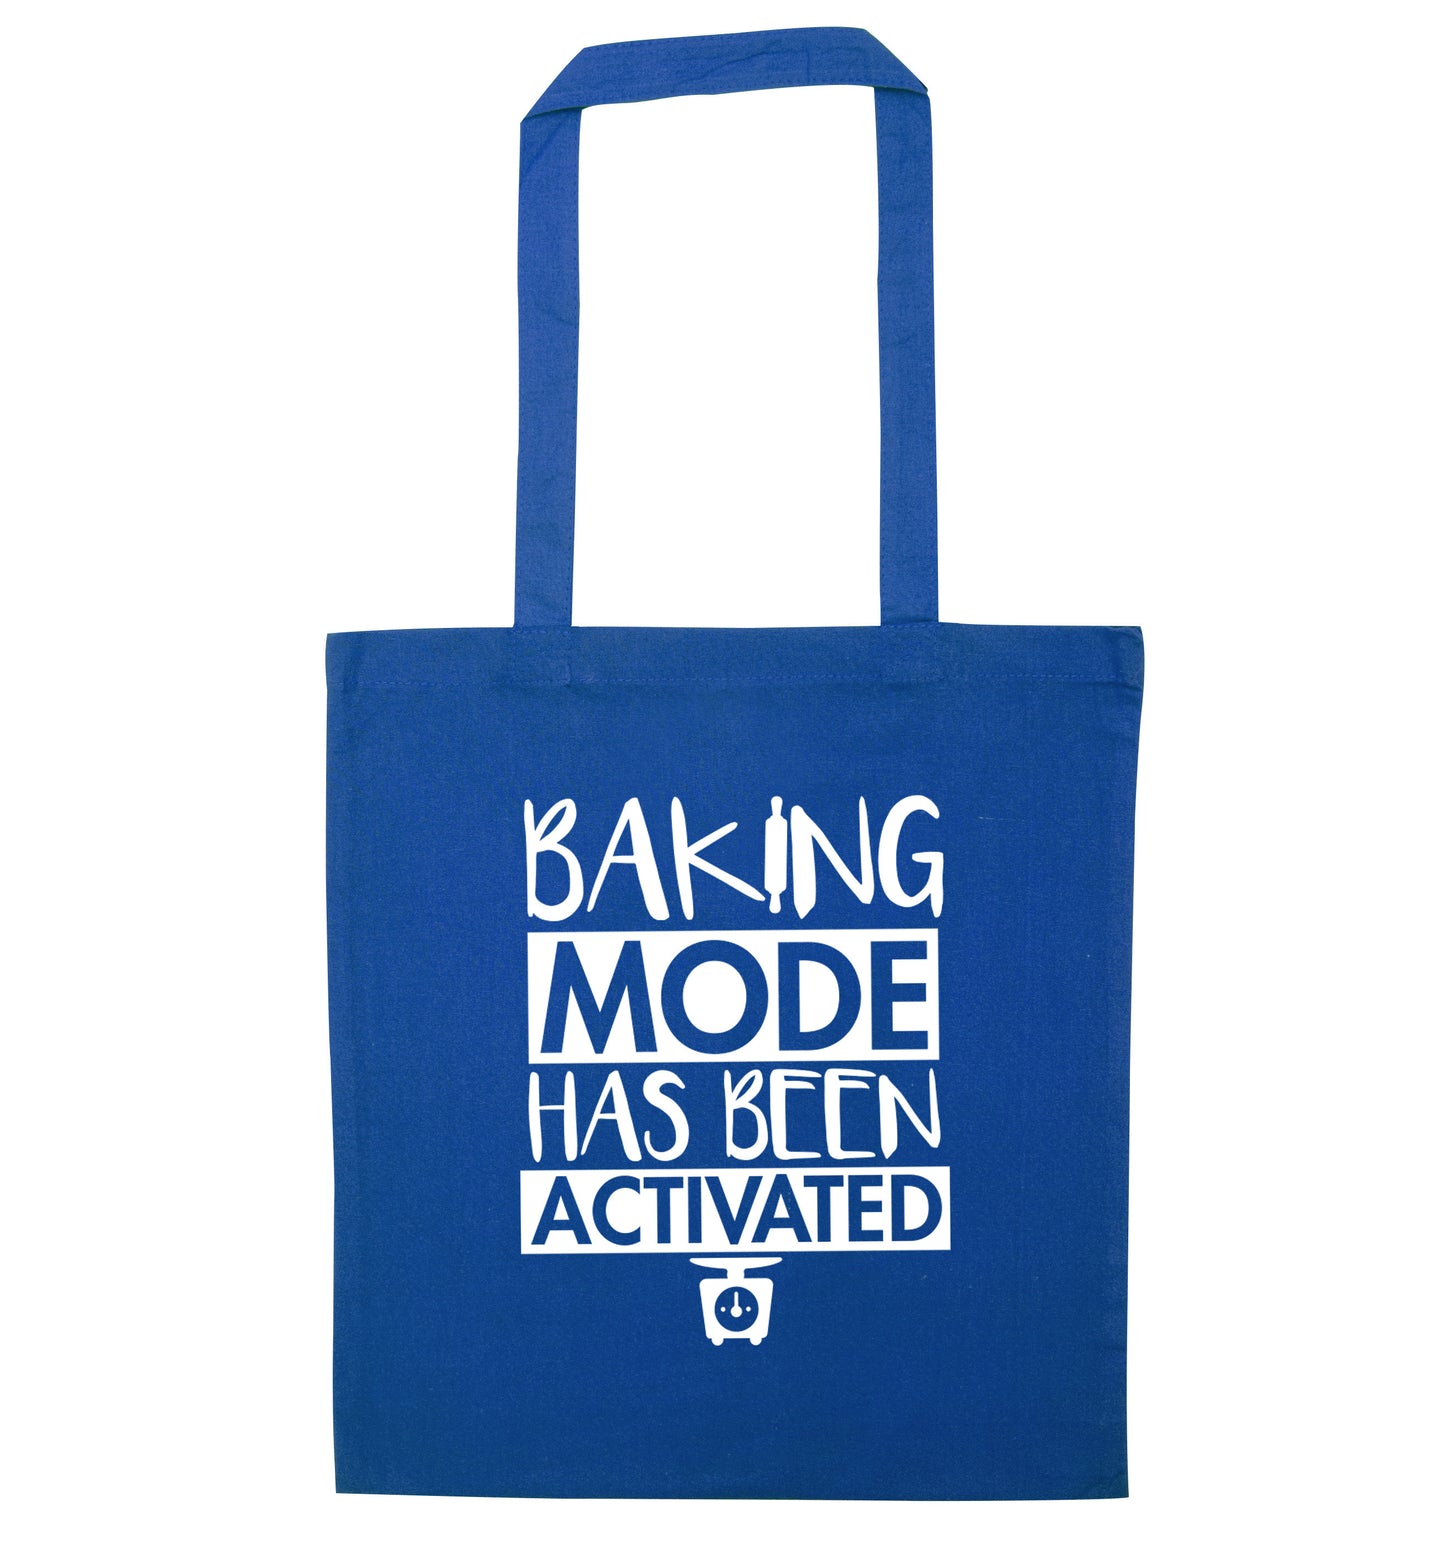 Baking mode has been activated blue tote bag